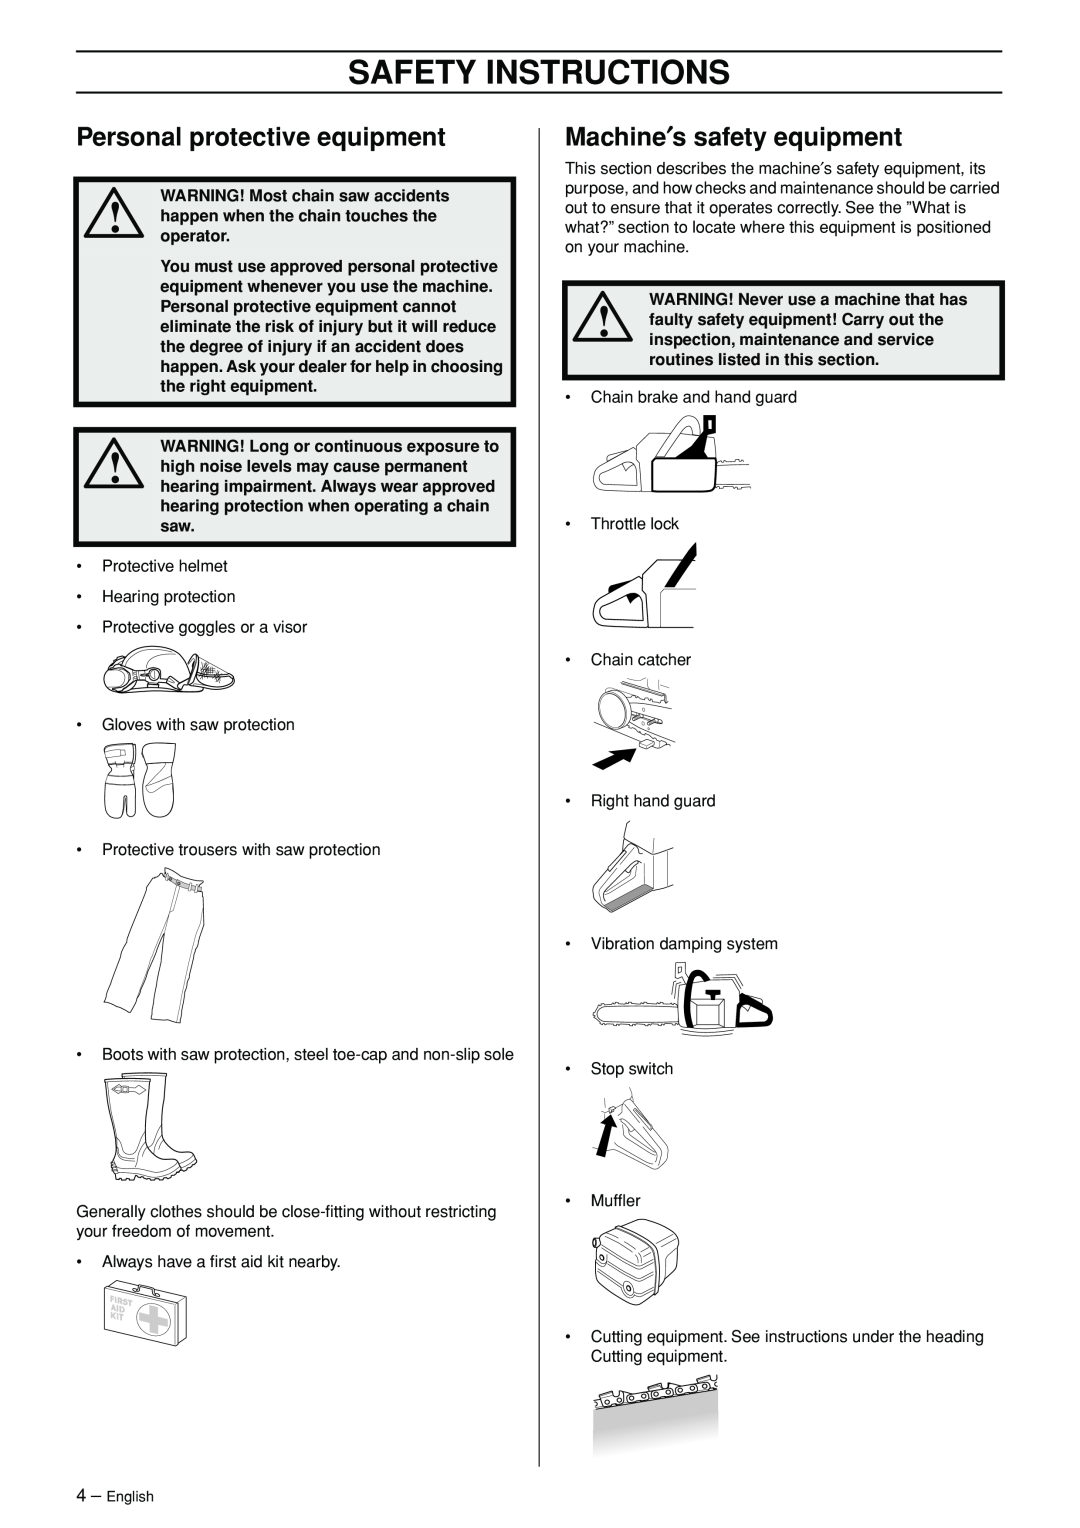 Jonsered CS 2147 manual Safety Instructions, Personal protective equipment, Machine′s safety equipment 